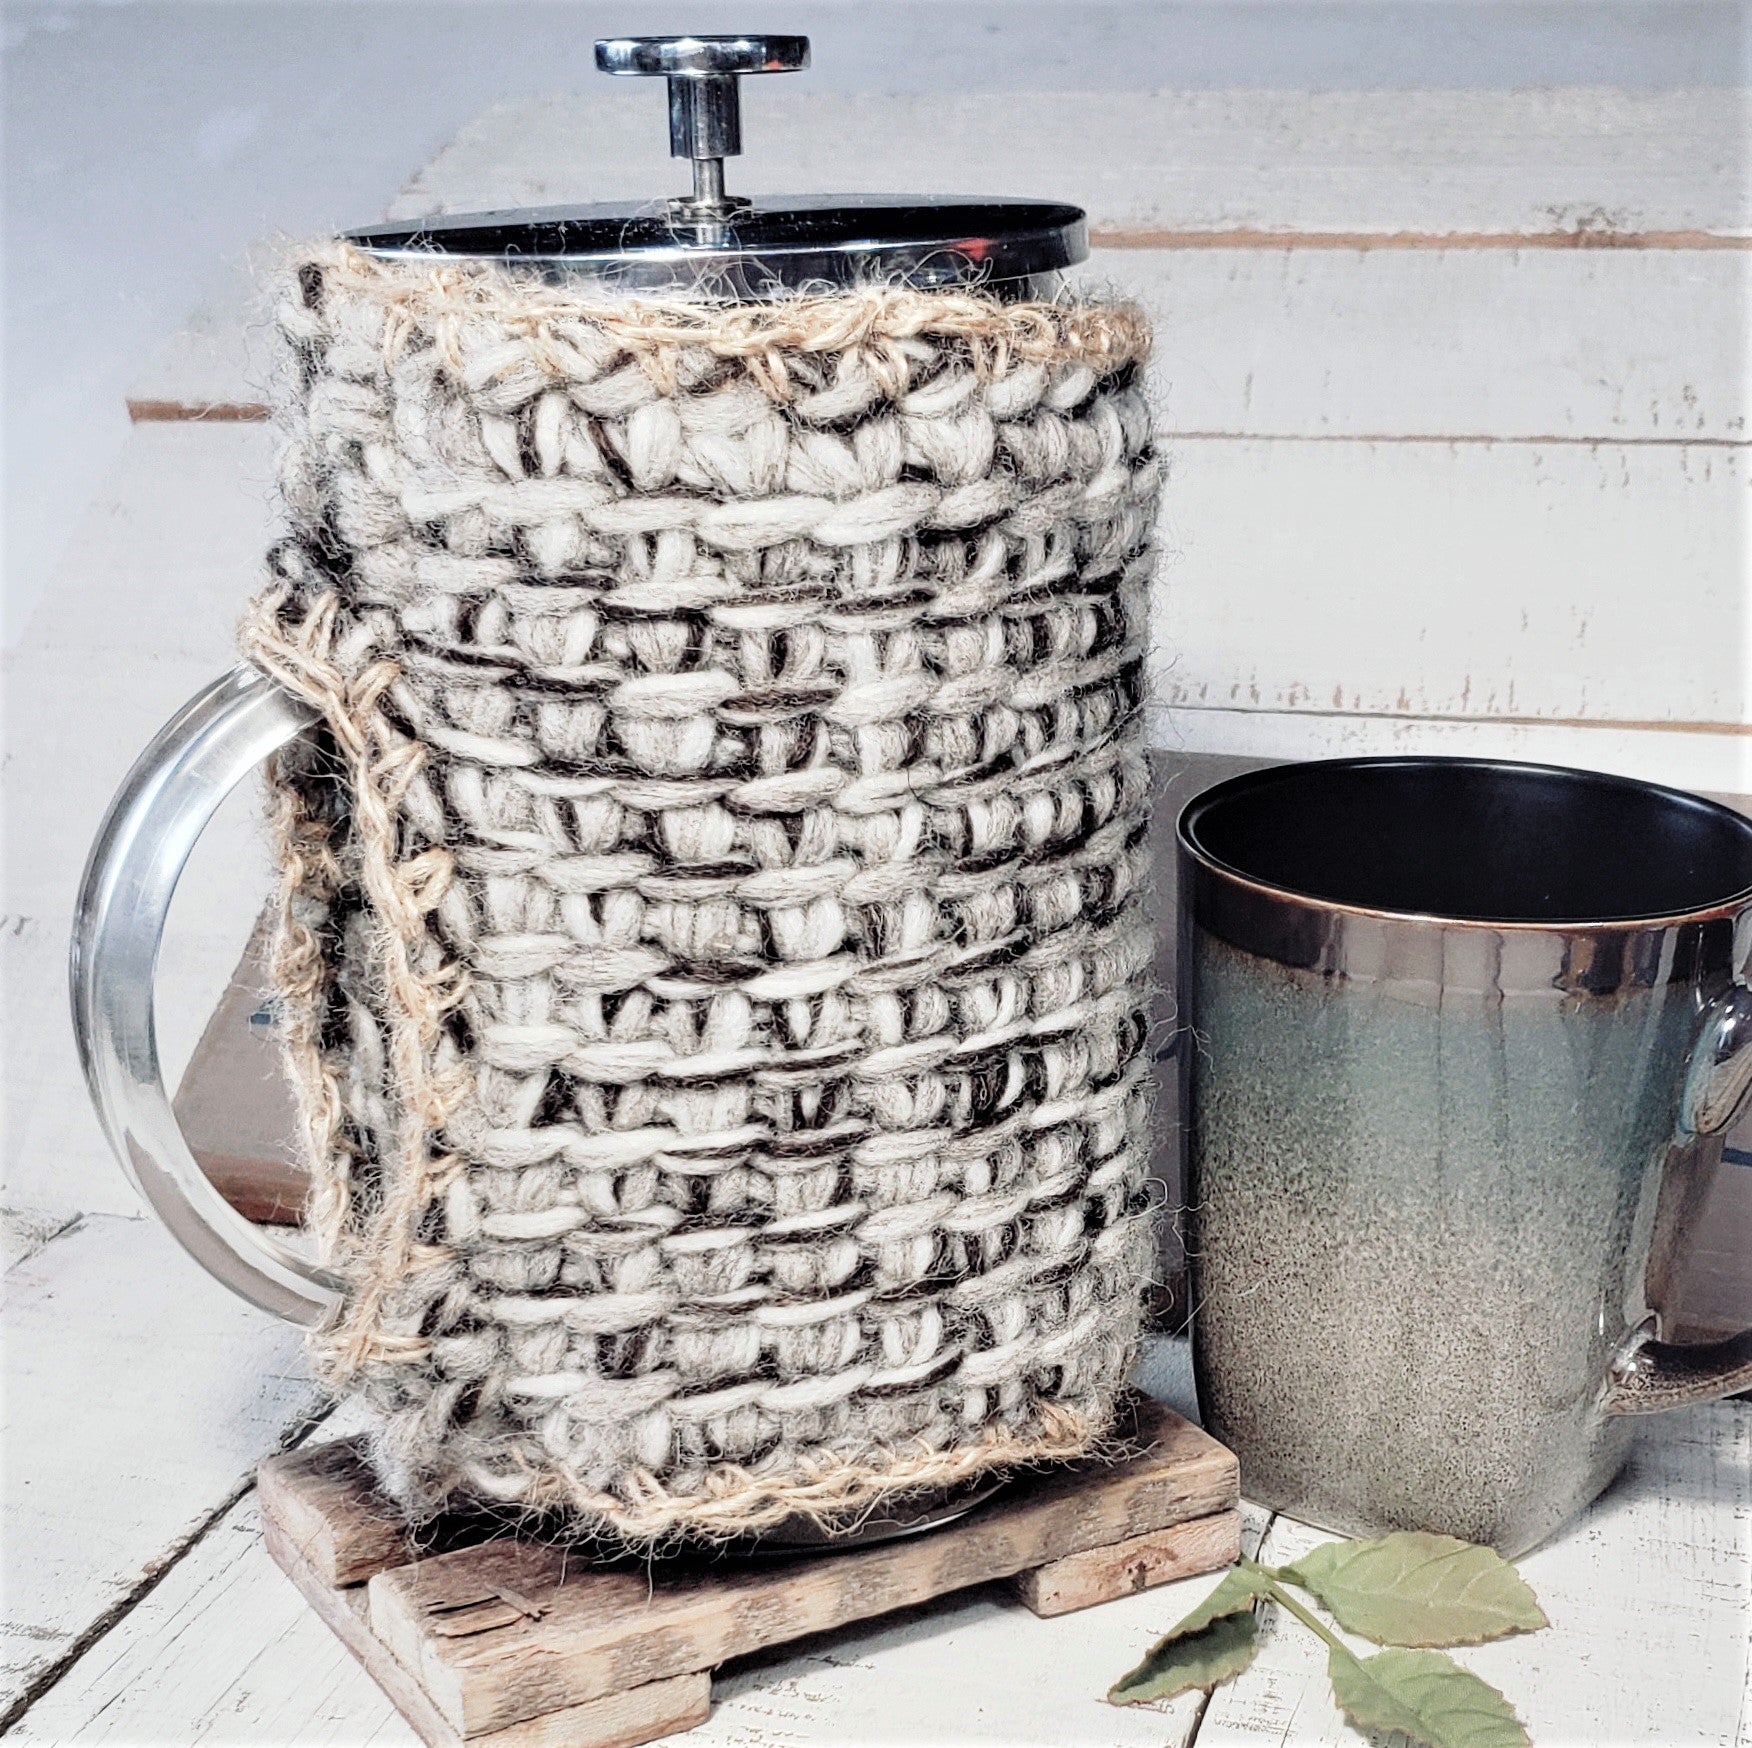 French Press Cozy, Bean Blanket- Cafetiere, Bean Belt Cover- Mocha Brown